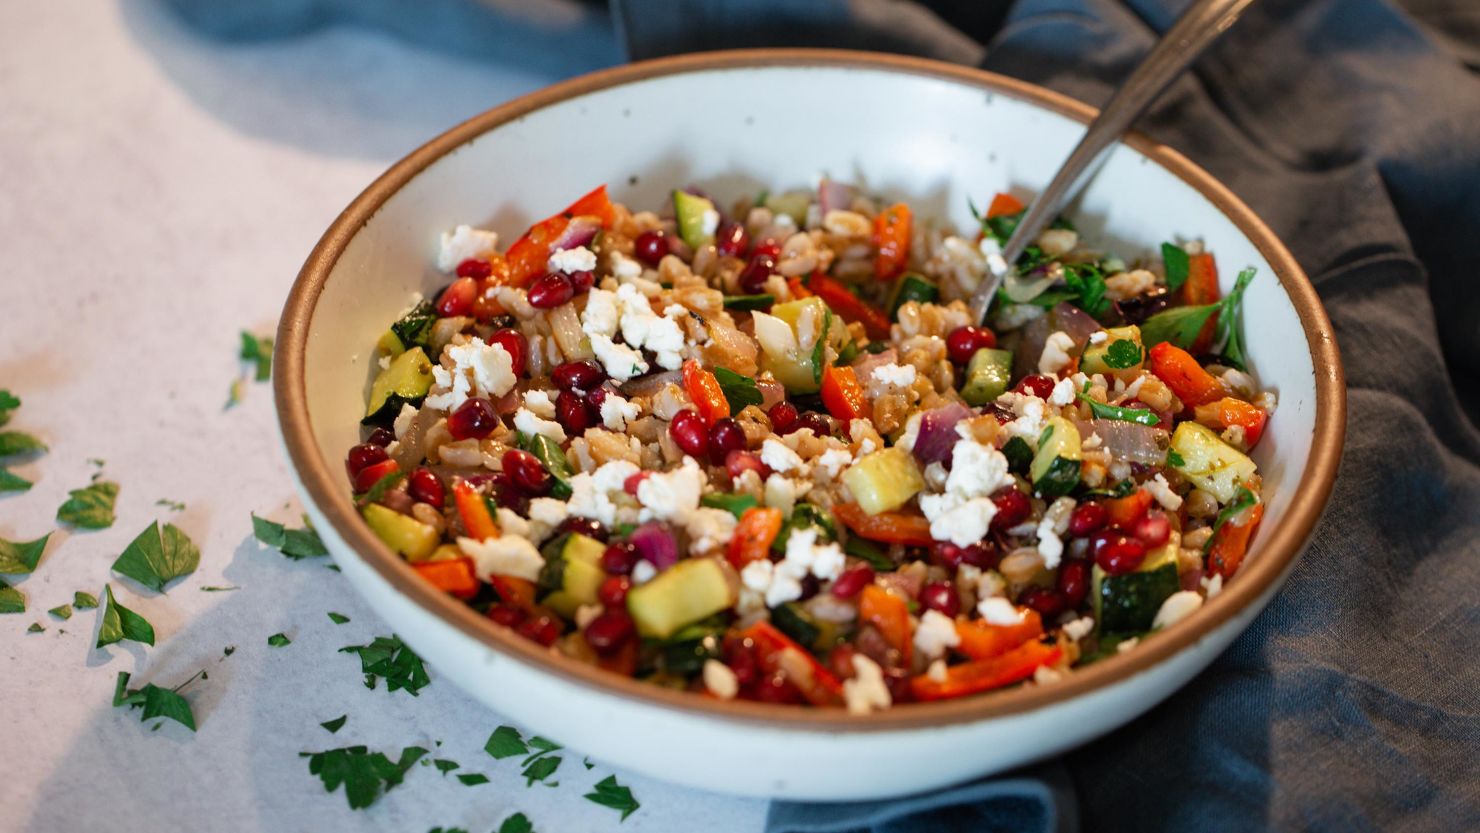 This vibrant grain salad is a satisfying lunch that will keep you energized all afternoon long.